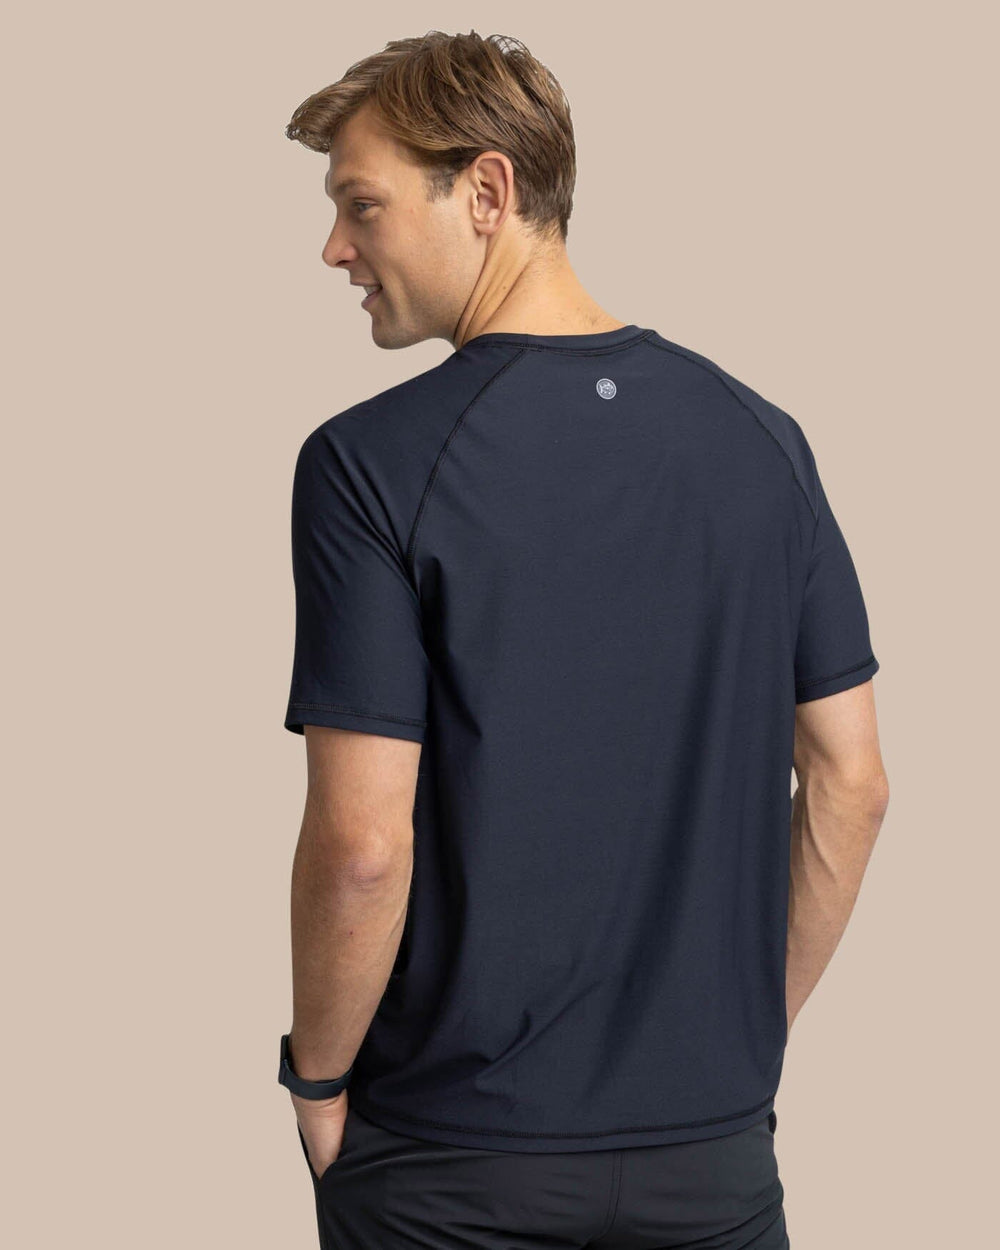 The back view of the Southern Tide brrr-illiant Performance T-Shirt by Southern Tide - Caviar Black